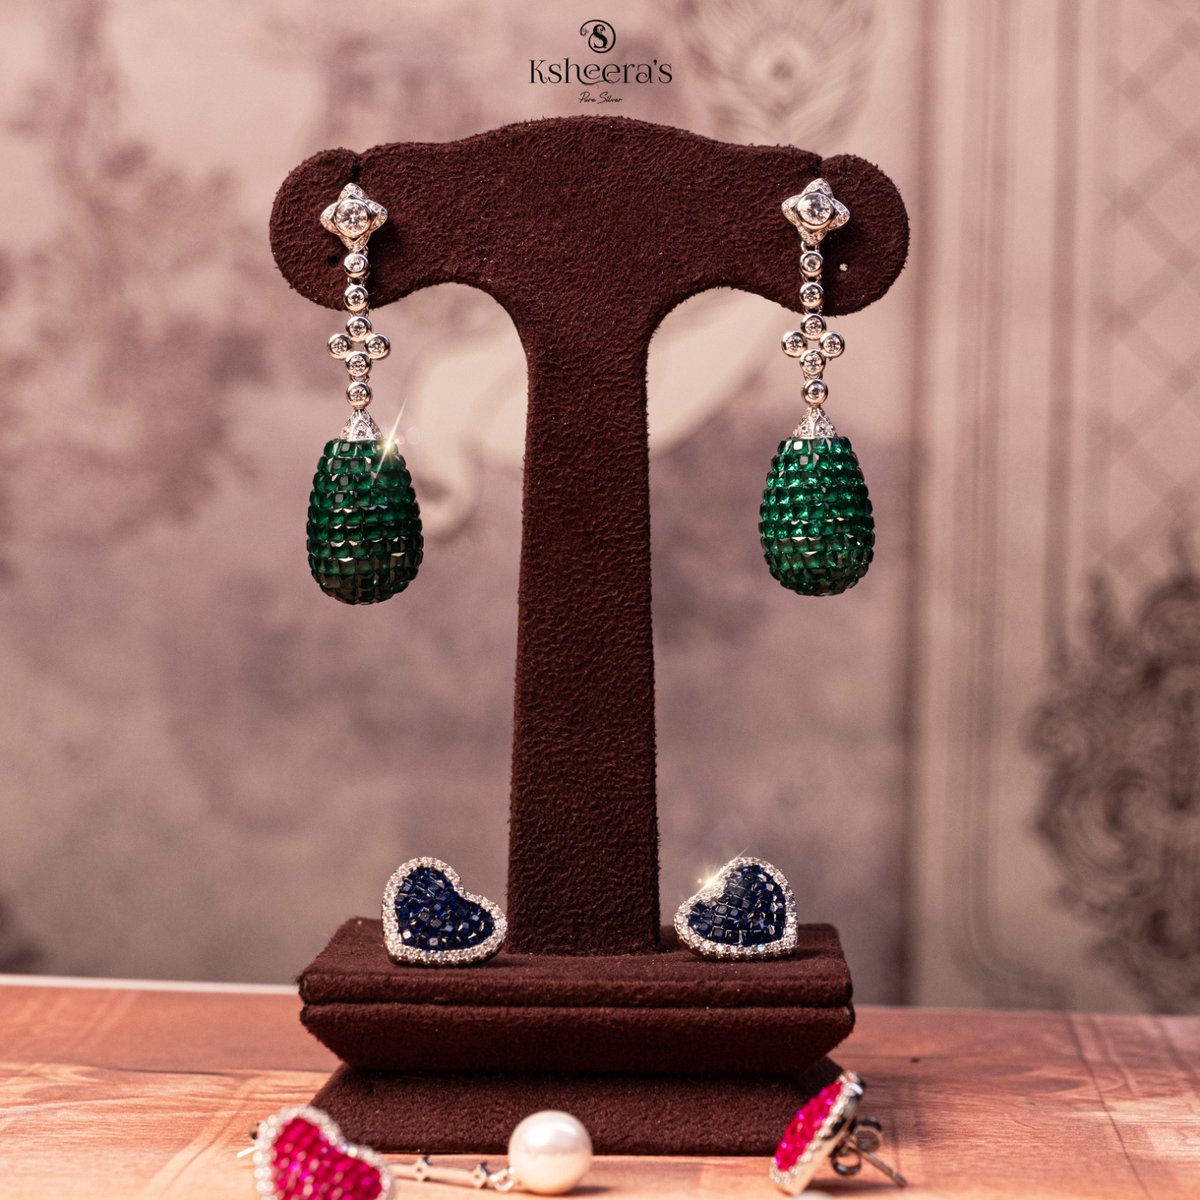 Bring a majestic flair to your accessories with the exquisite designs from Ksheera’s Jewelry!

#ksheeras #jewellery #jewelry #cocktailjewellery #partywear #jewelryaddict #jewelery #trending #trendingnow #trendingfashion #earrings #earringsoftheday #earringsofinstagram